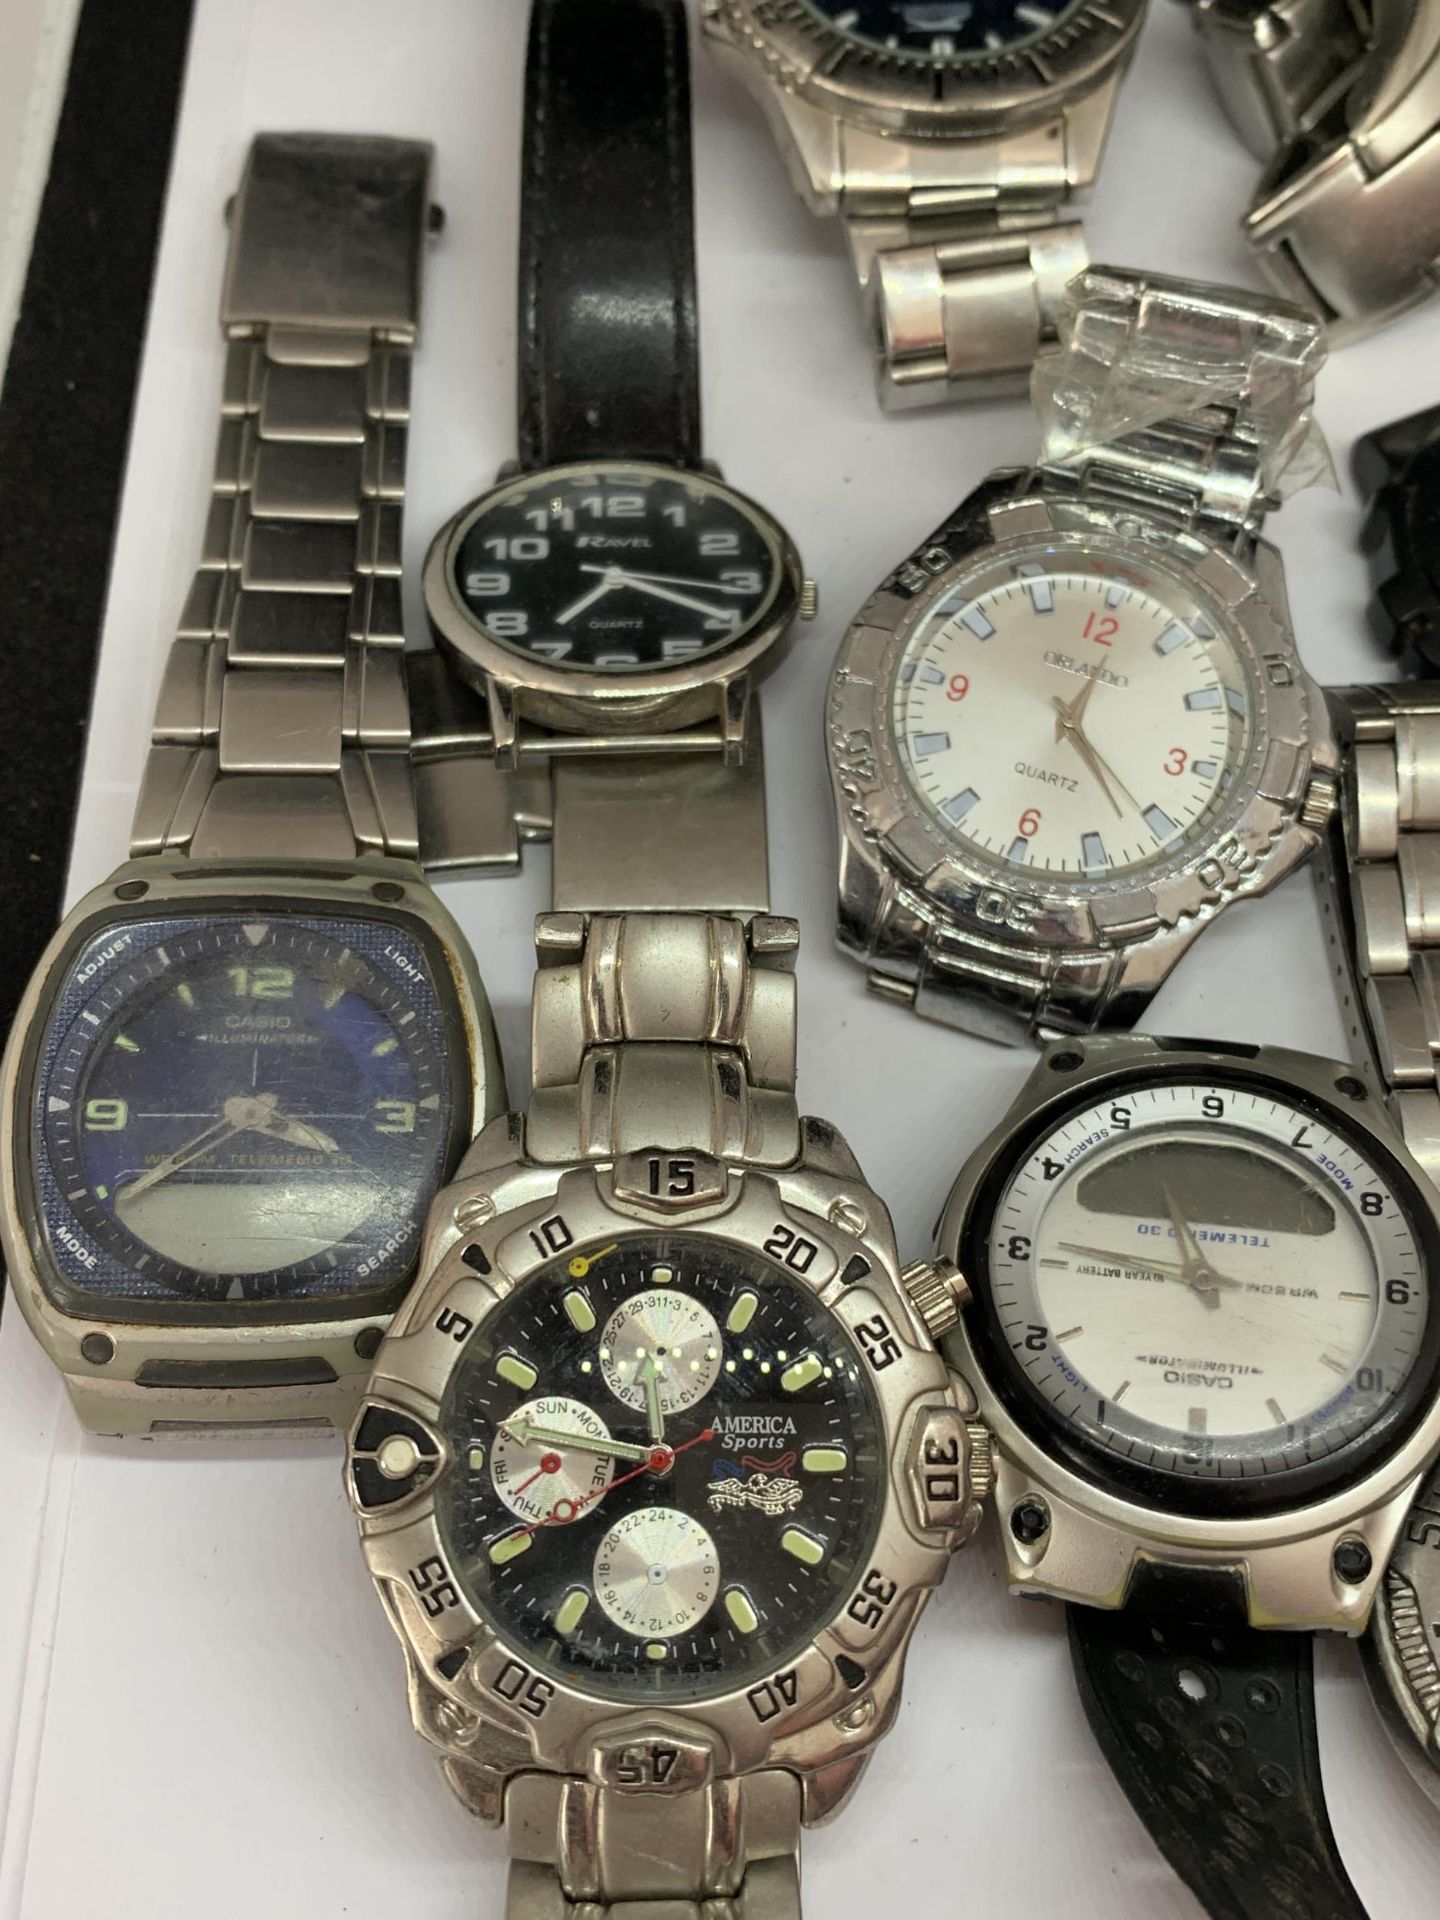 A LARGE QUANTITY OF WRIST WATCHES - Image 2 of 4